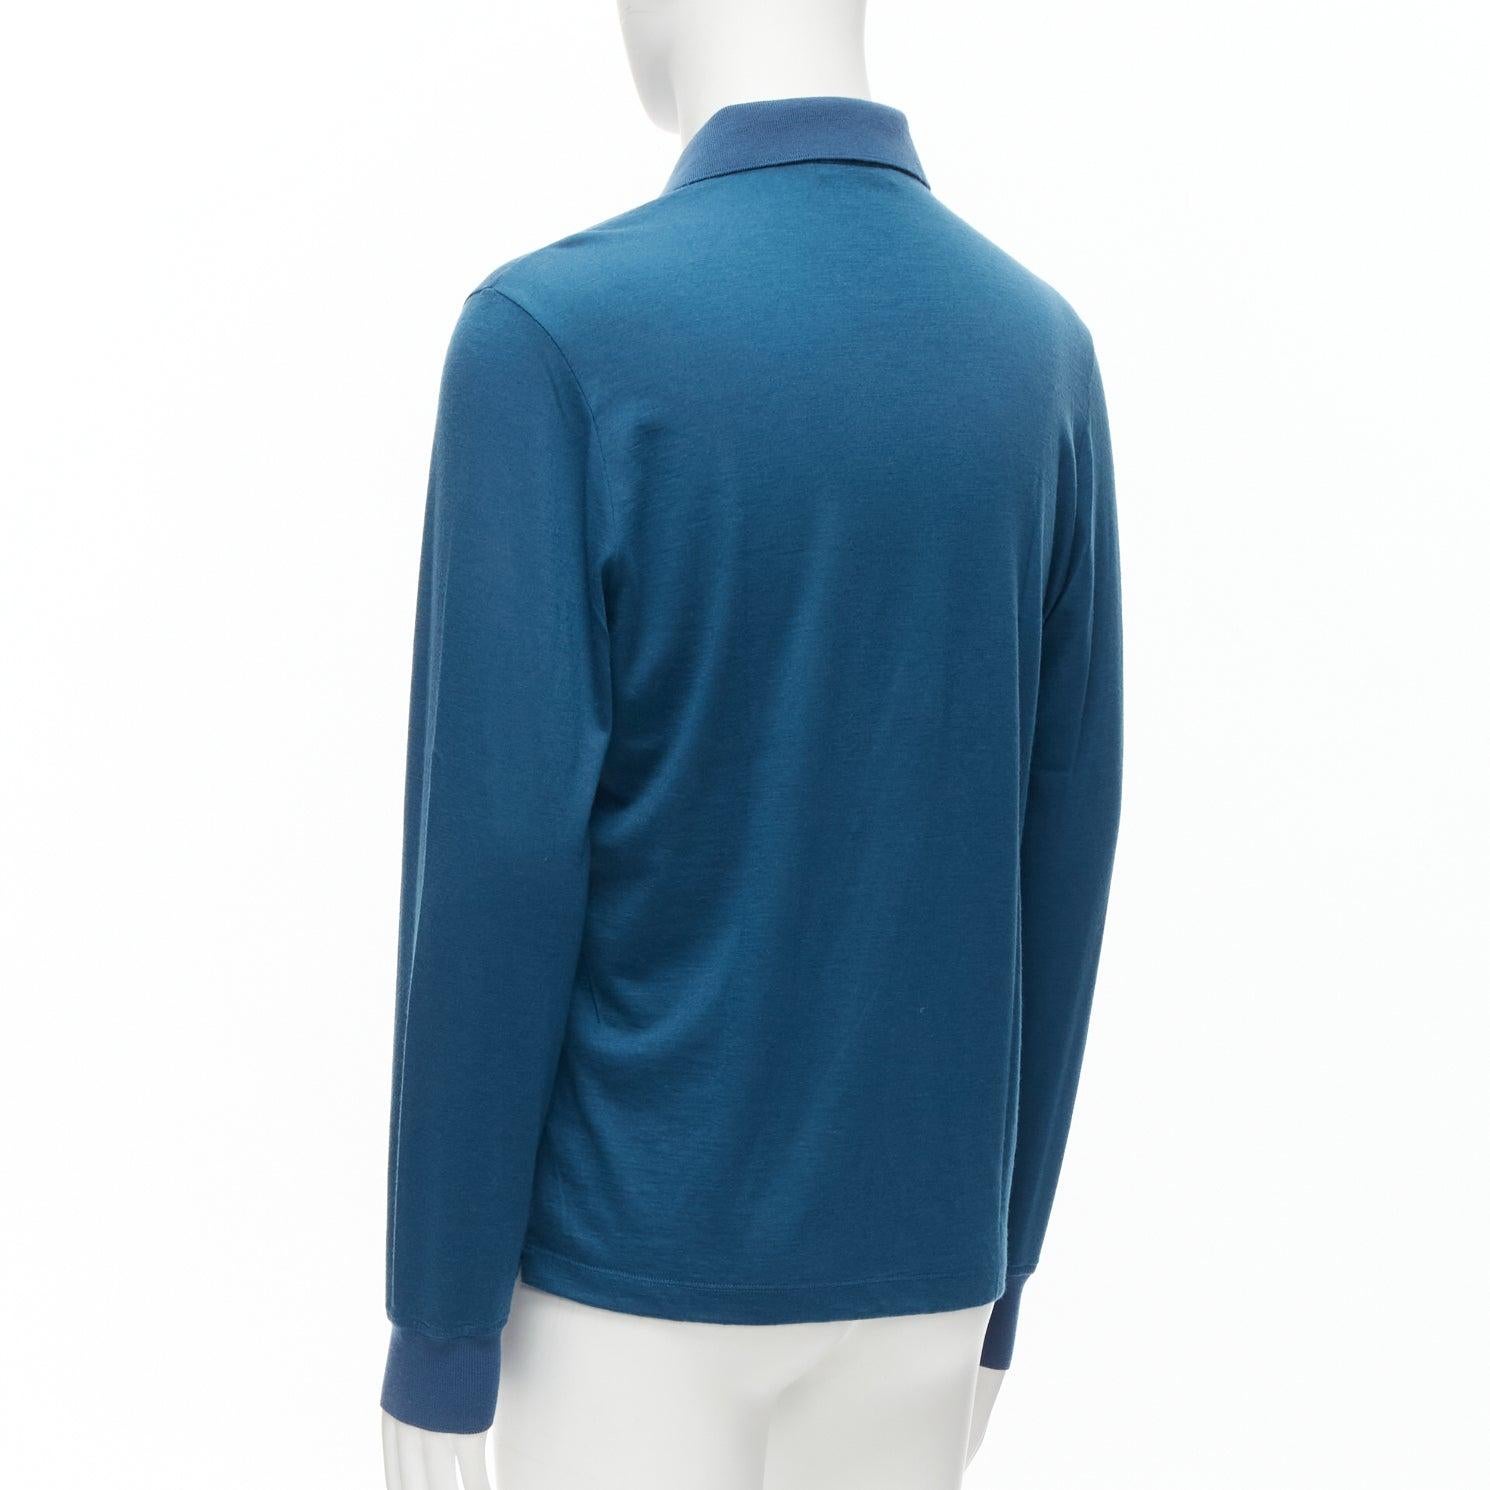 LORO PIANA teal blue 100% cashmere stitch button detail long sleeve polo shirt M For Sale 1